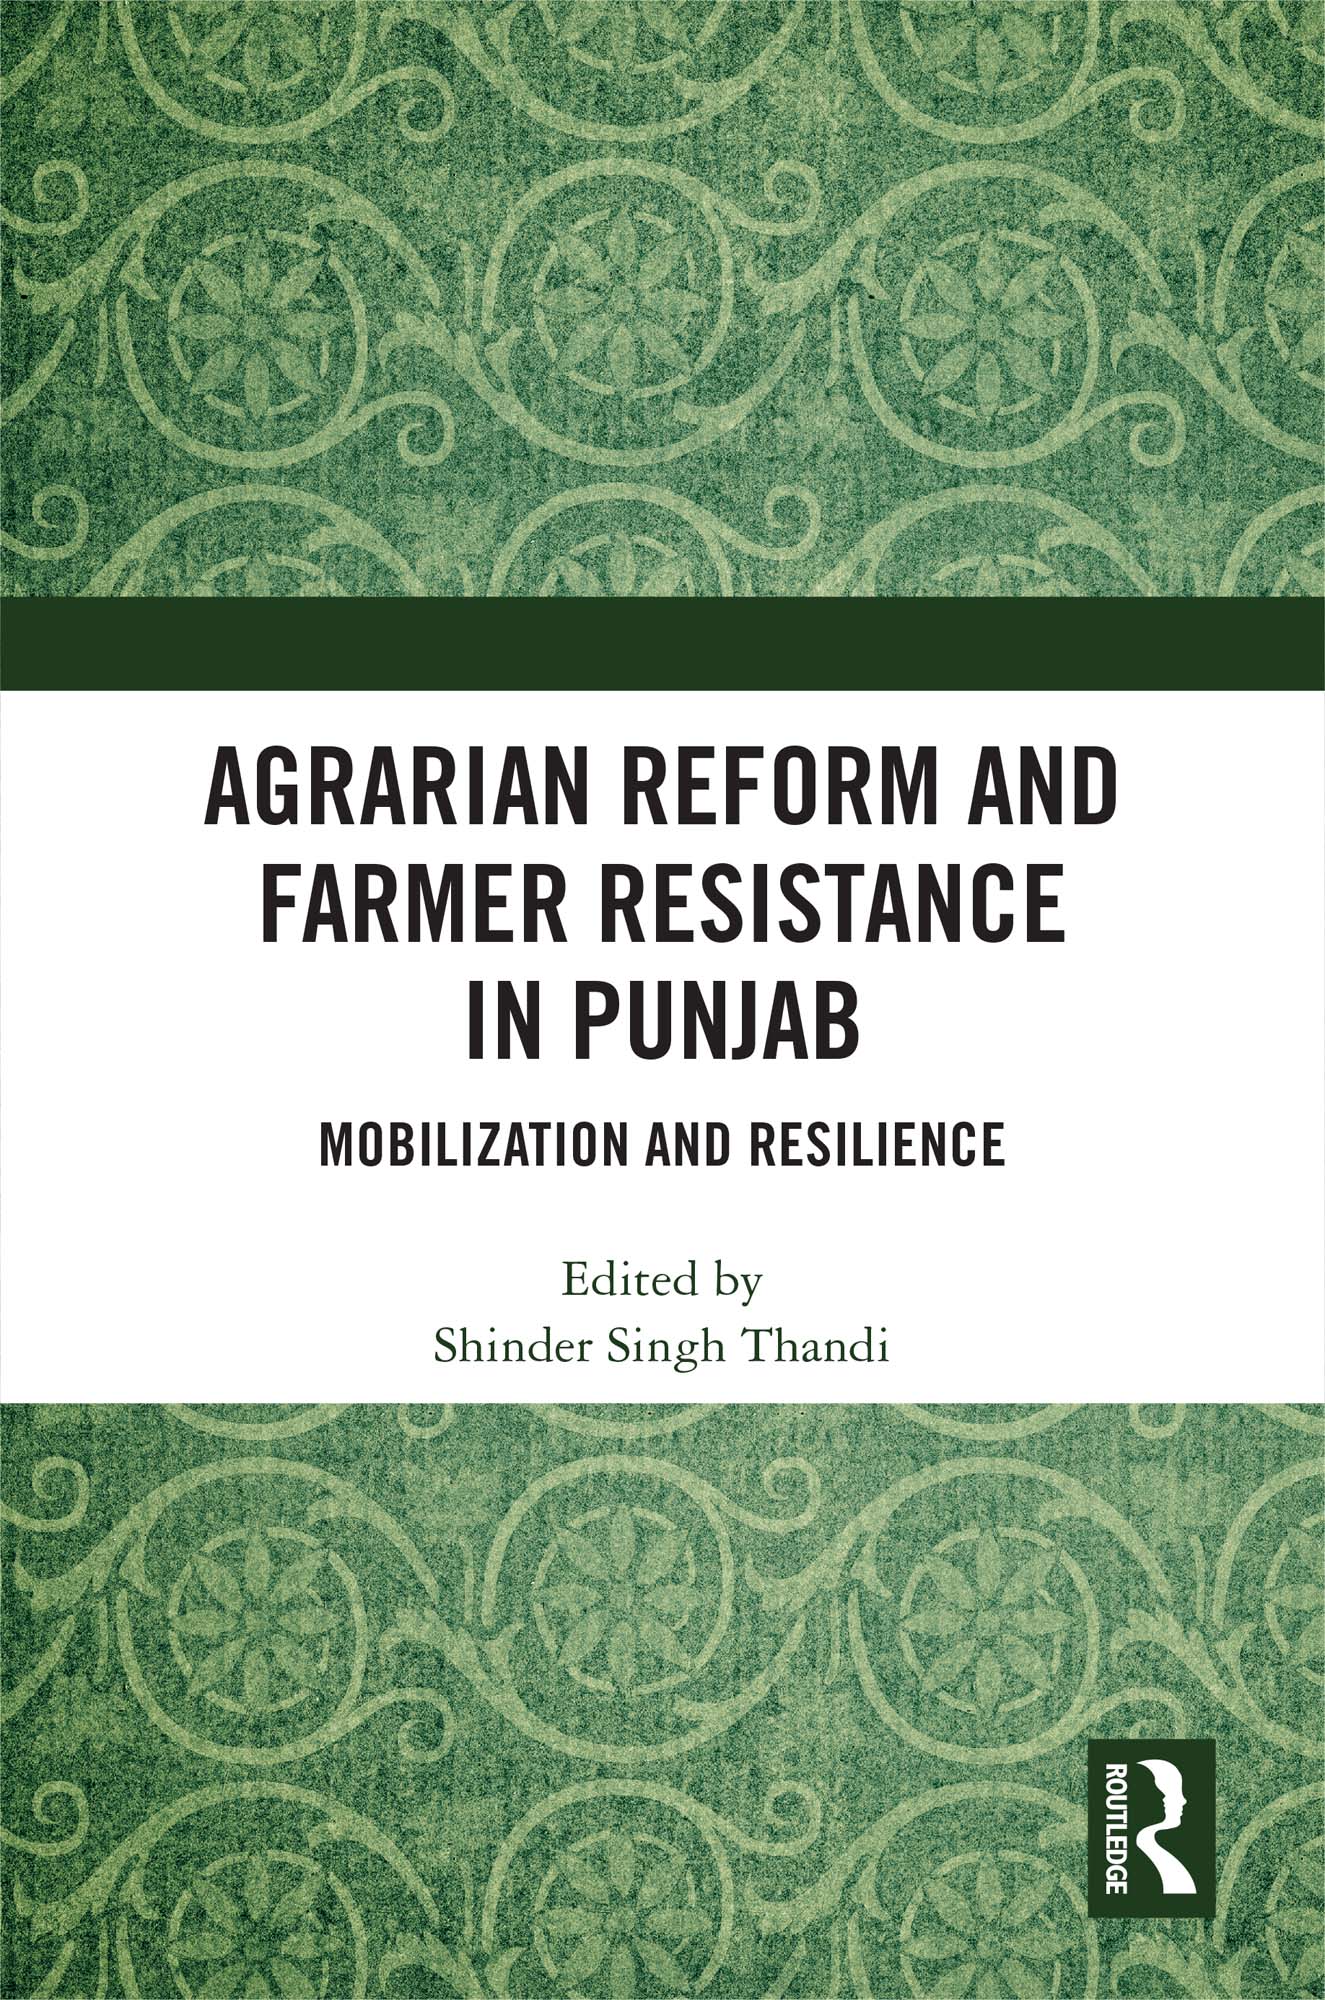 Agrarian Reform and Farmer Resistance in Punjab